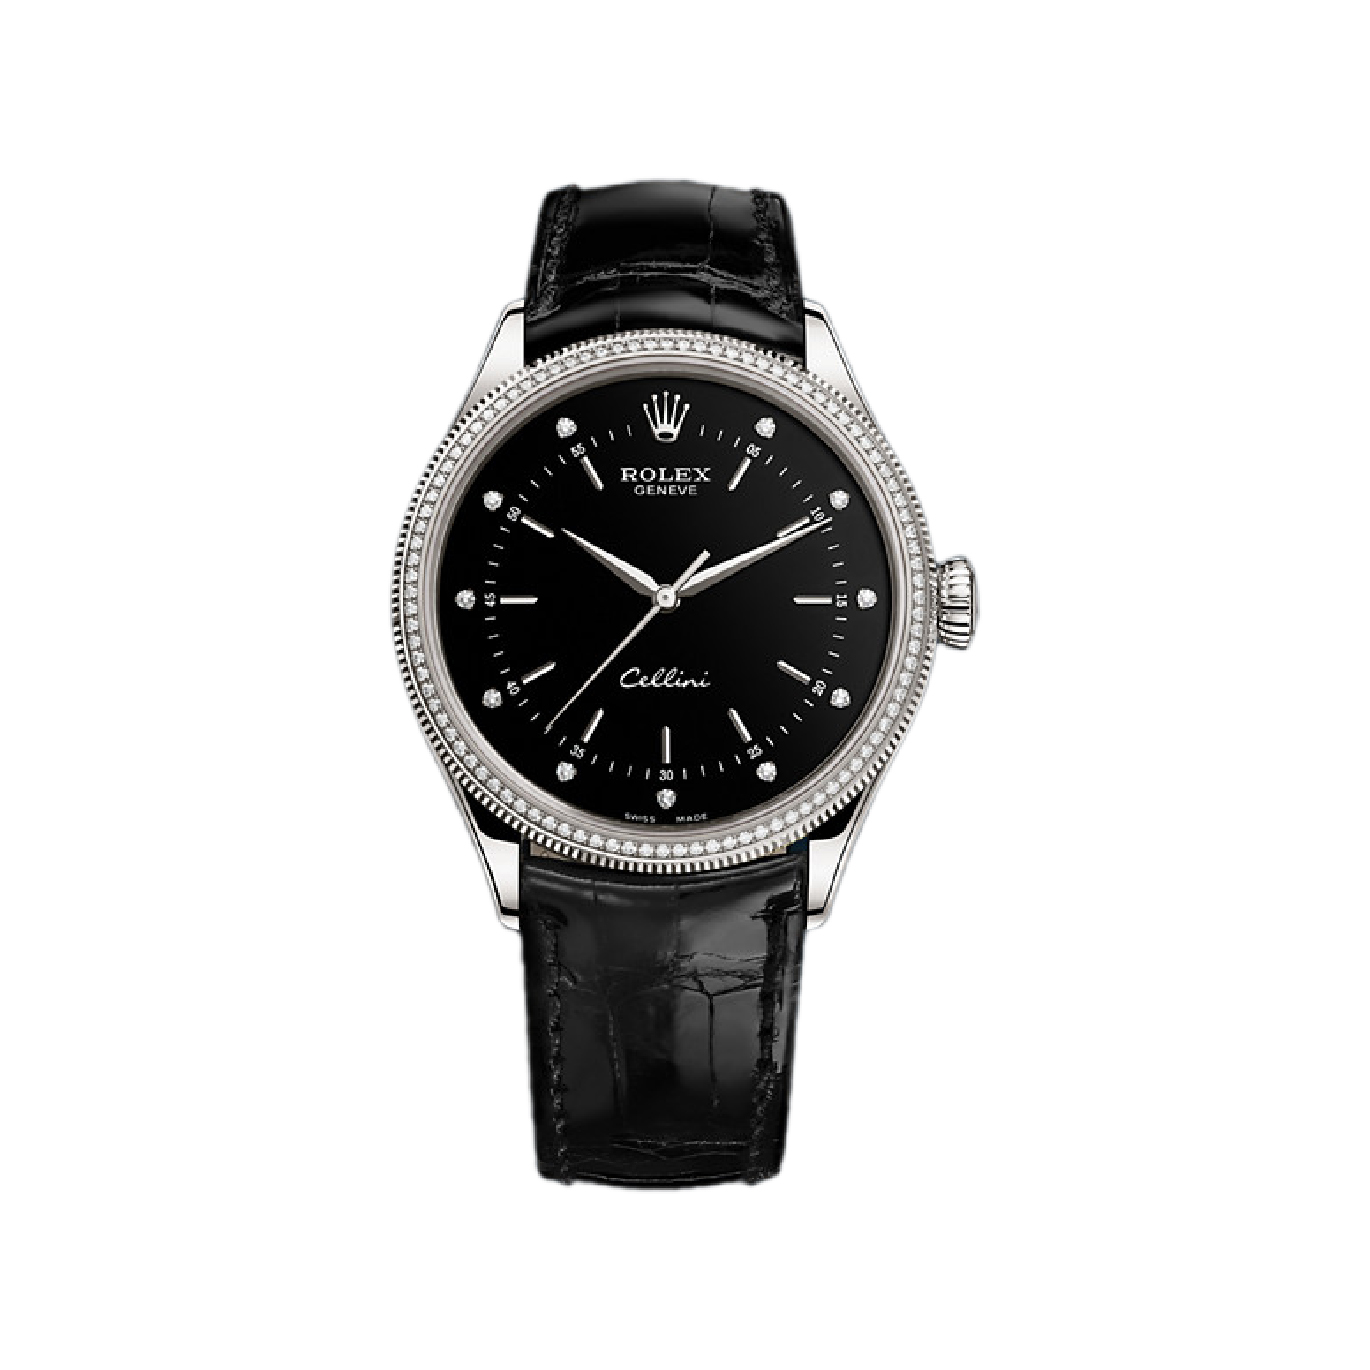 Cellini Time 50609RBR White Gold Watch (Black Set with Diamonds)